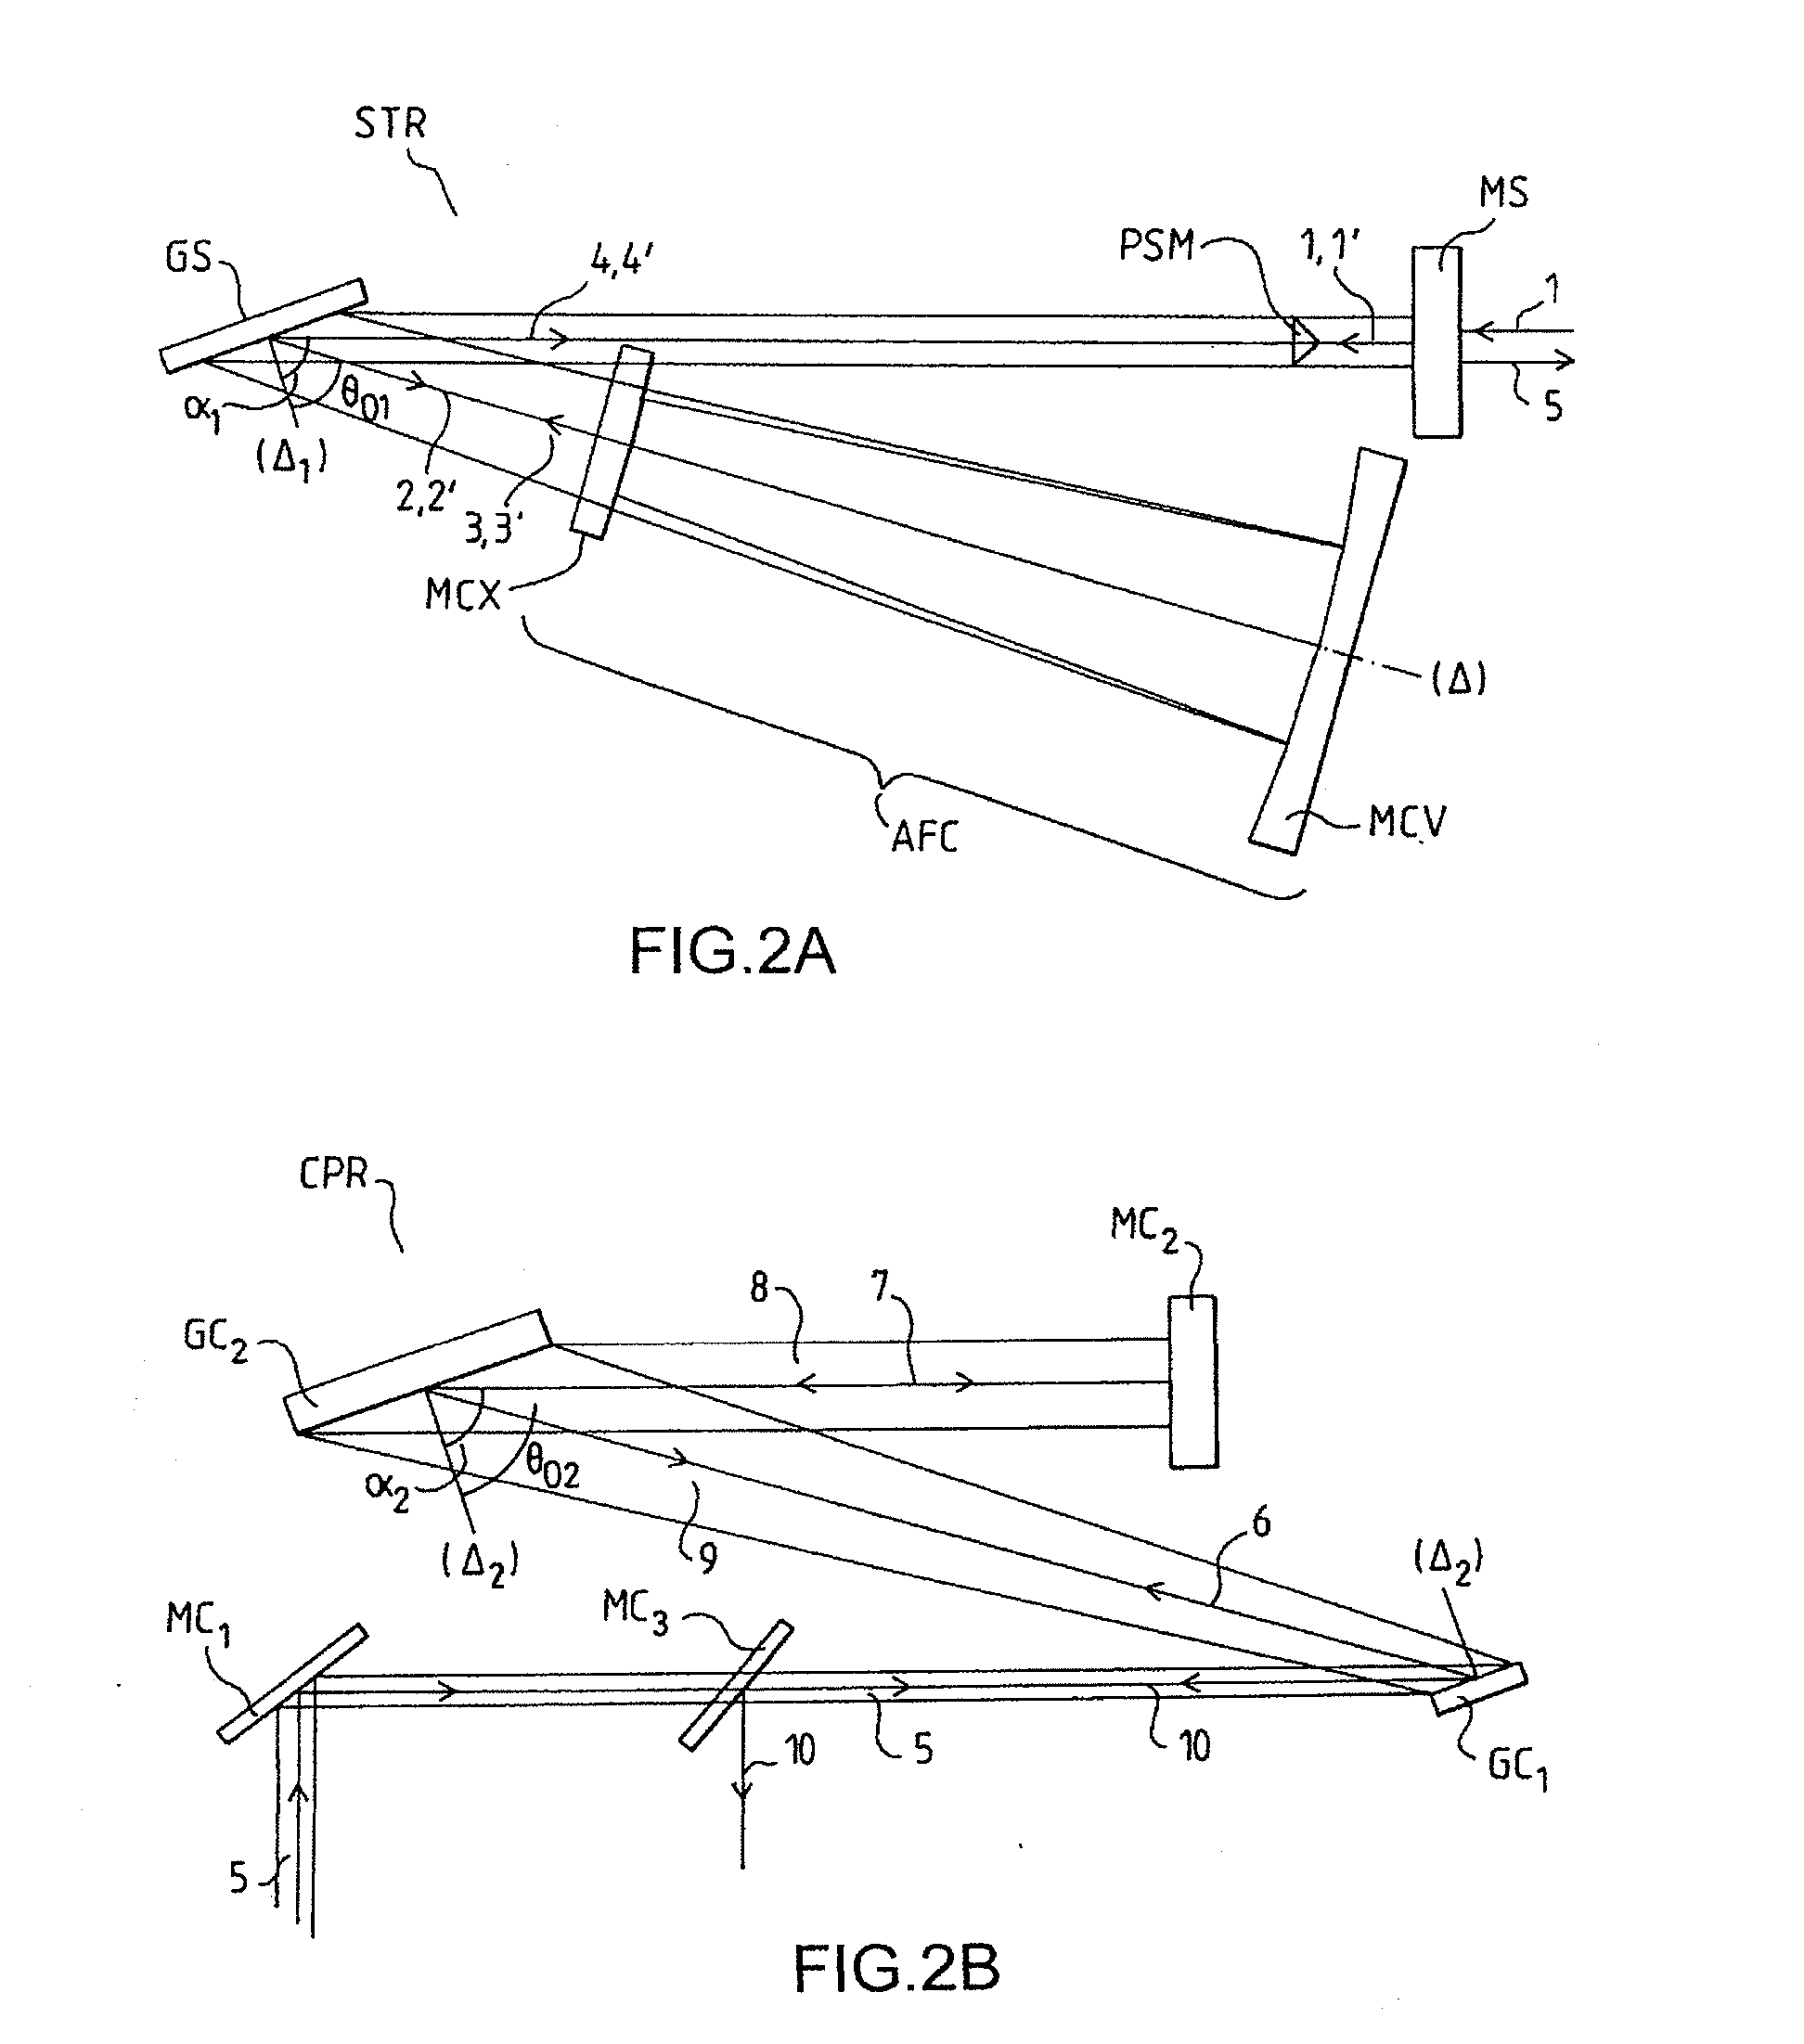 Amplifier Chain for Generating Ultrashort Different Width Light Pulses